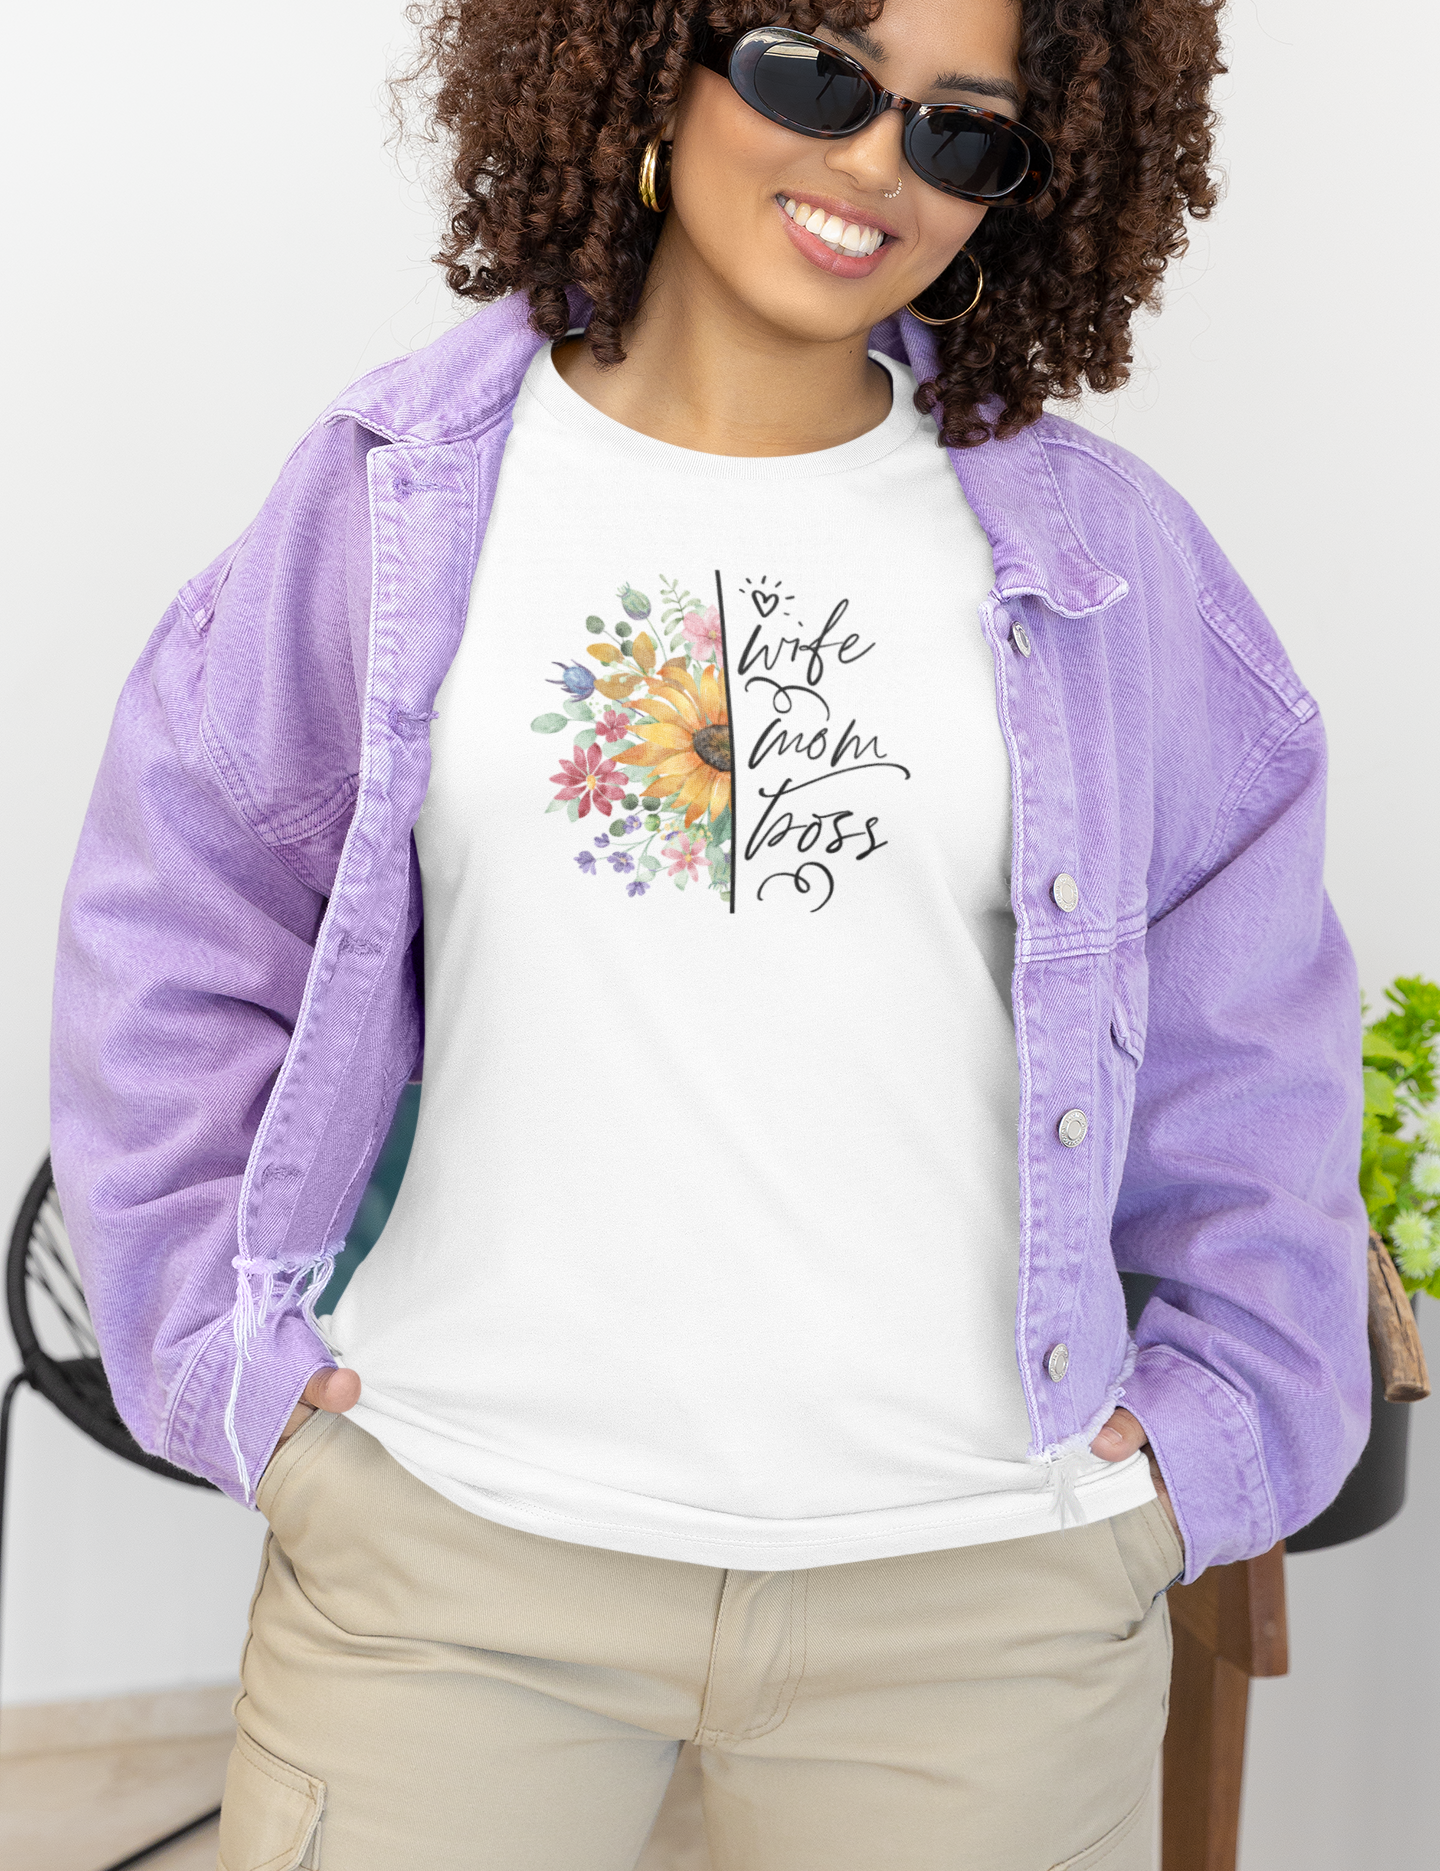 rounded-neck-bella-canvas-tee-mockup-of-a-woman-with-sunglasses-m31484.png